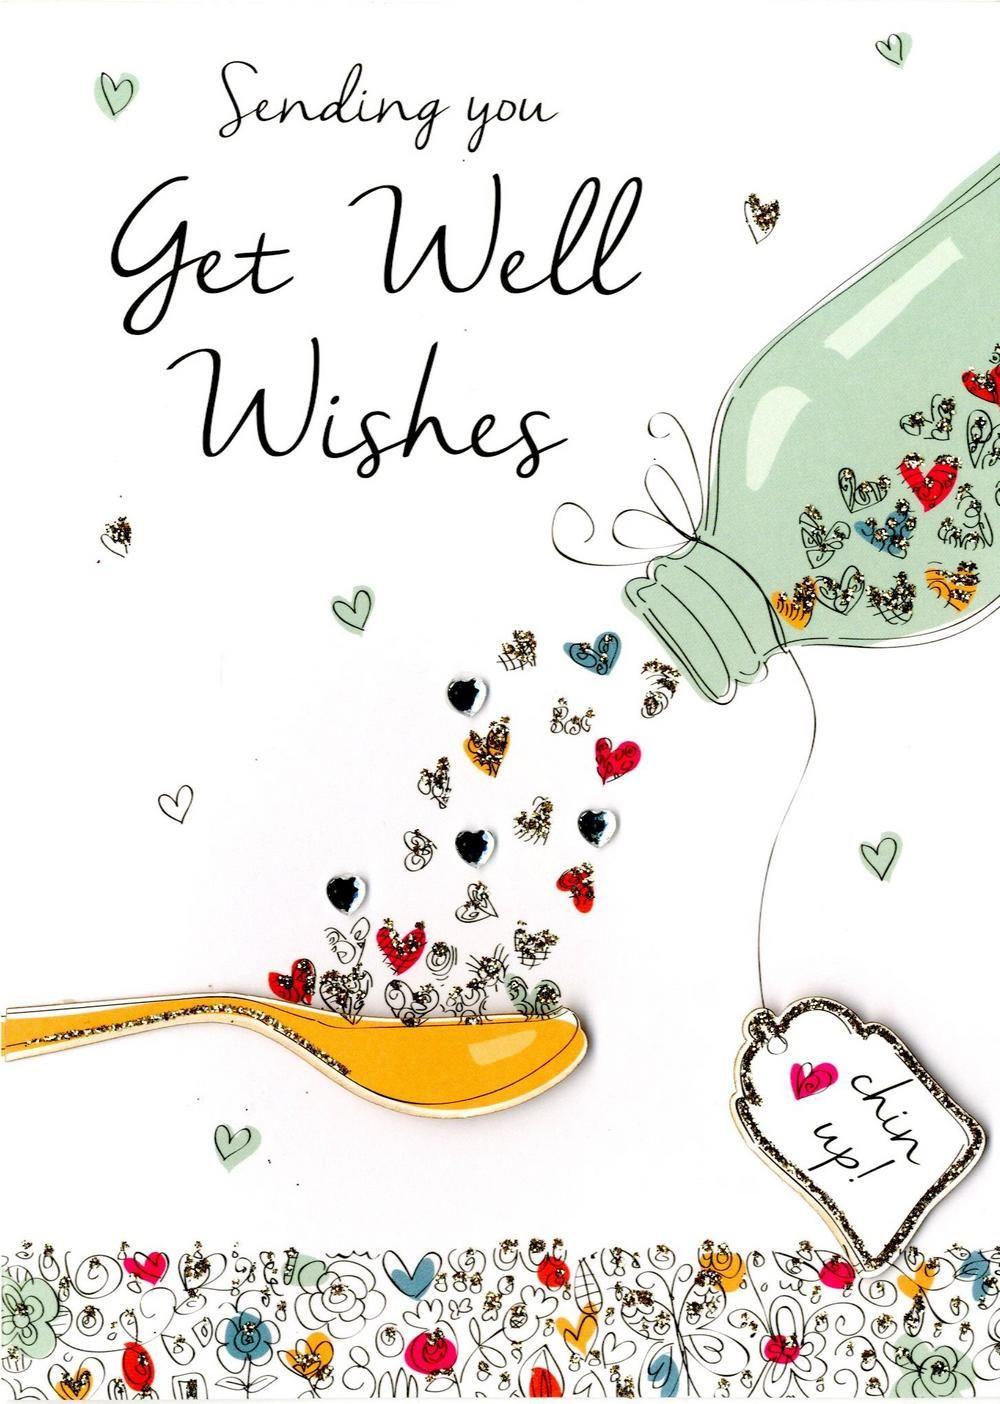 Best ideas about Birthday Well Wishes
. Save or Pin Get Well Wishes Greeting Card Get Well Soon Now.